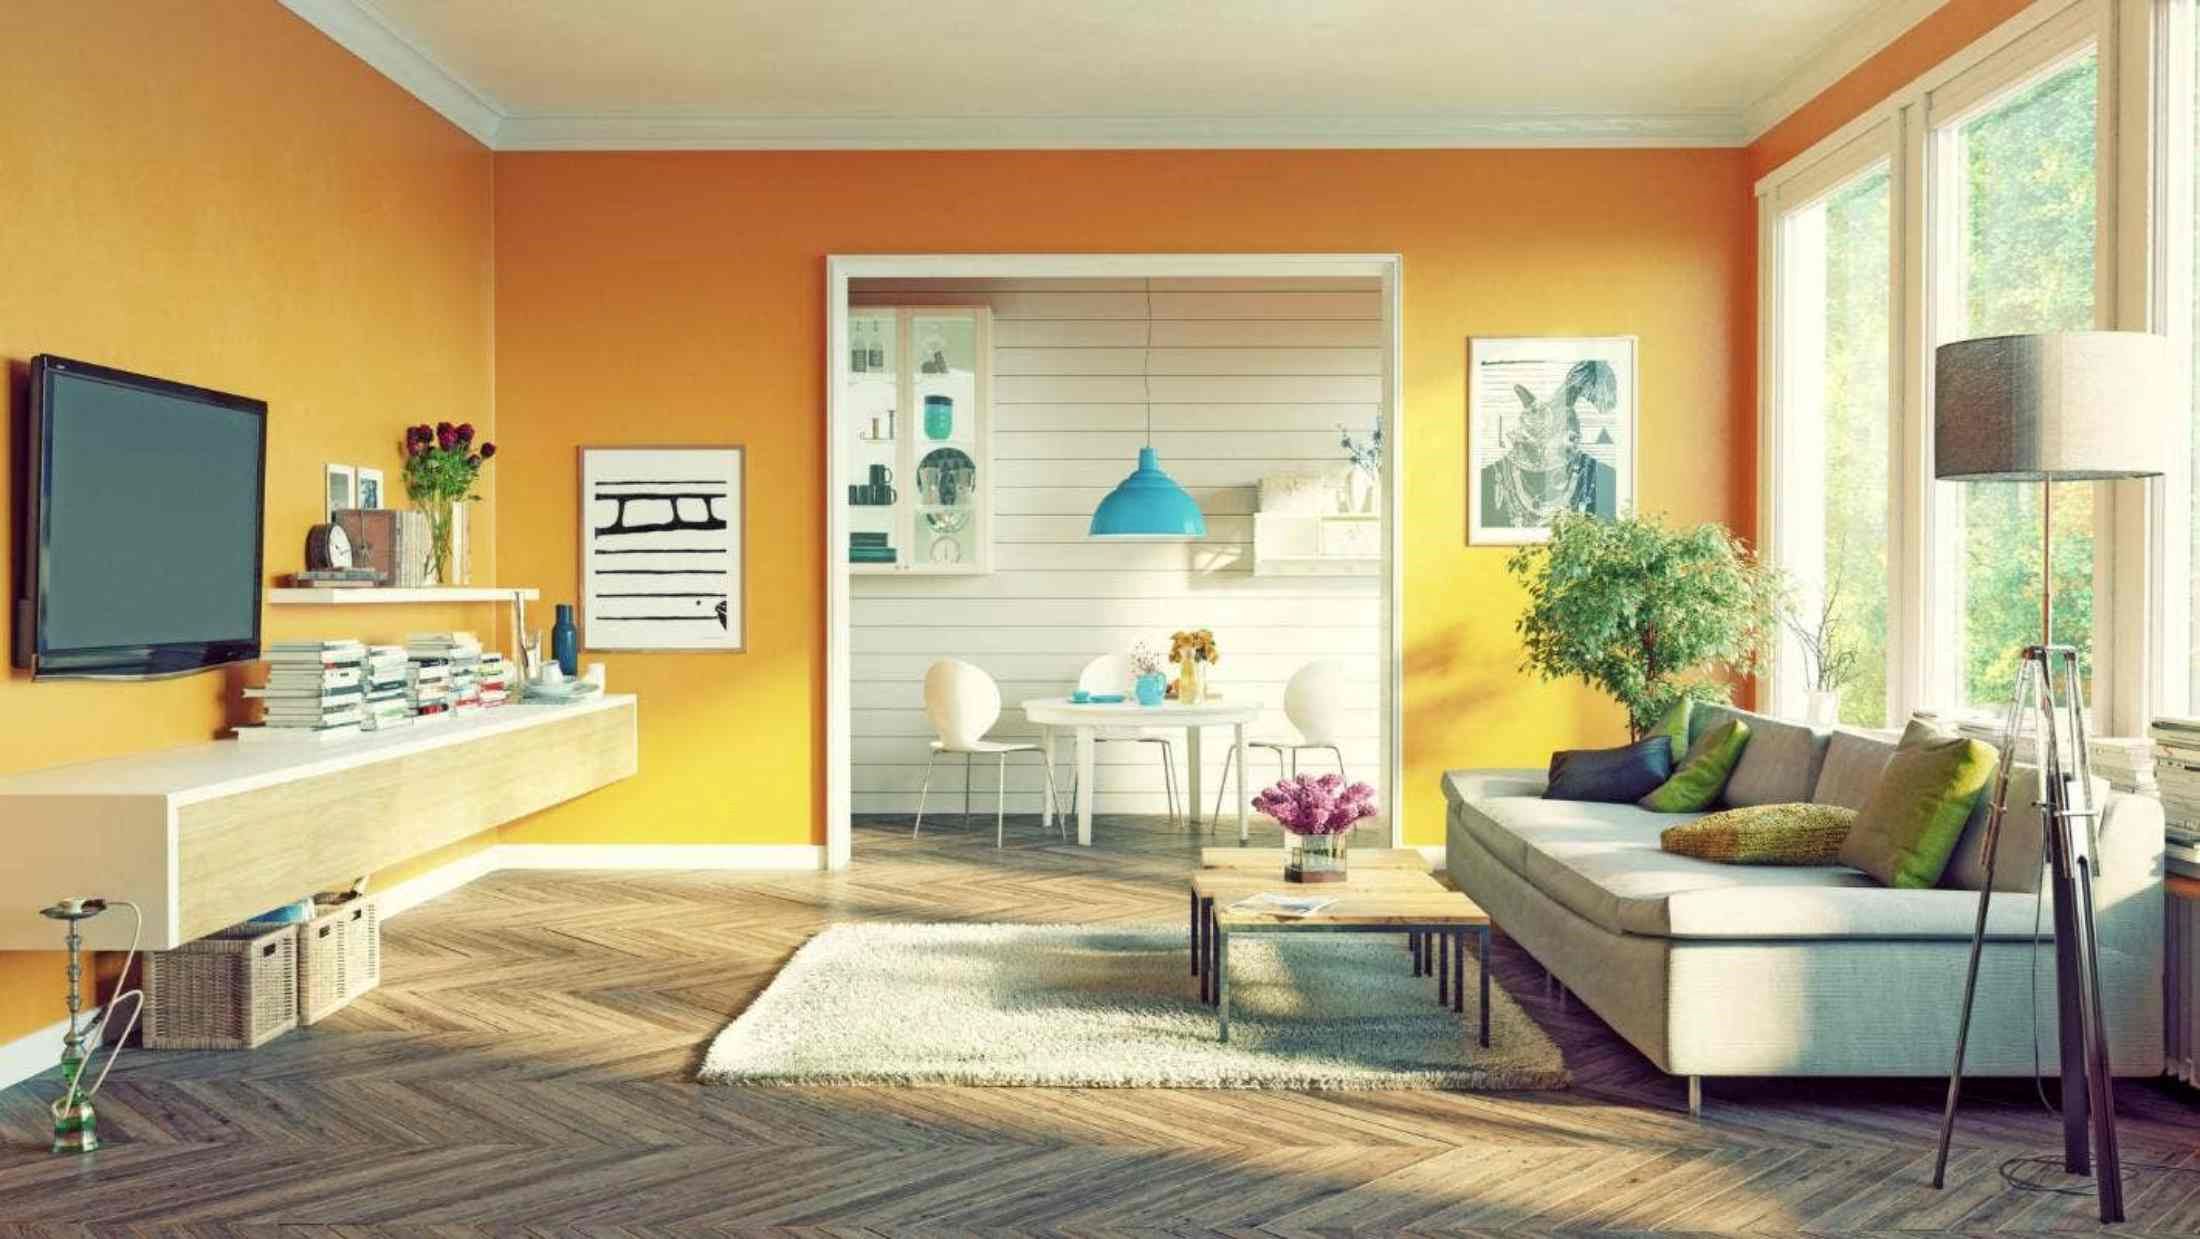 Concept living room with orange walls